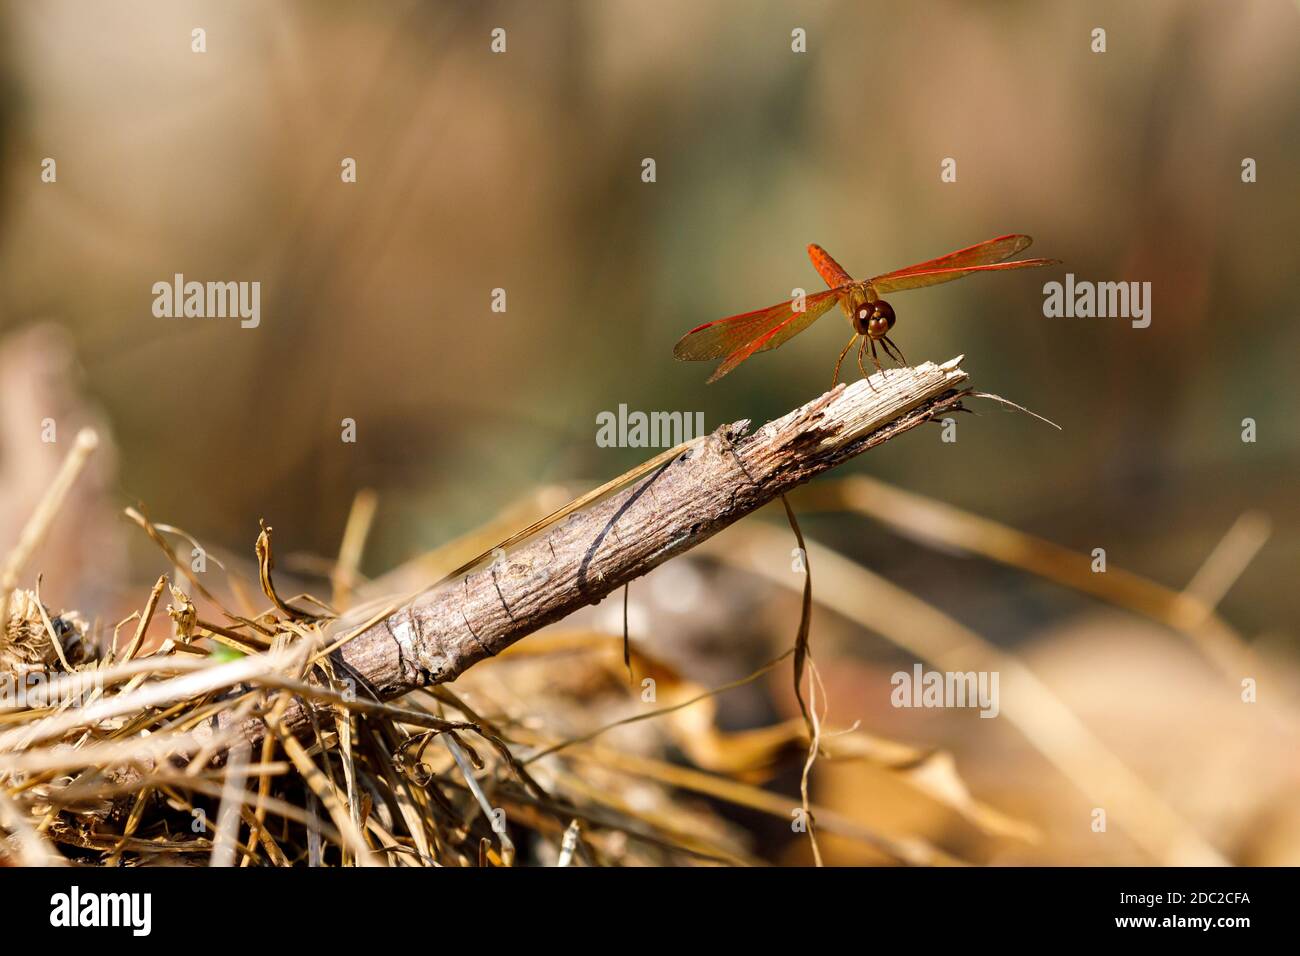 A red dragonfly on a branch Stock Photo